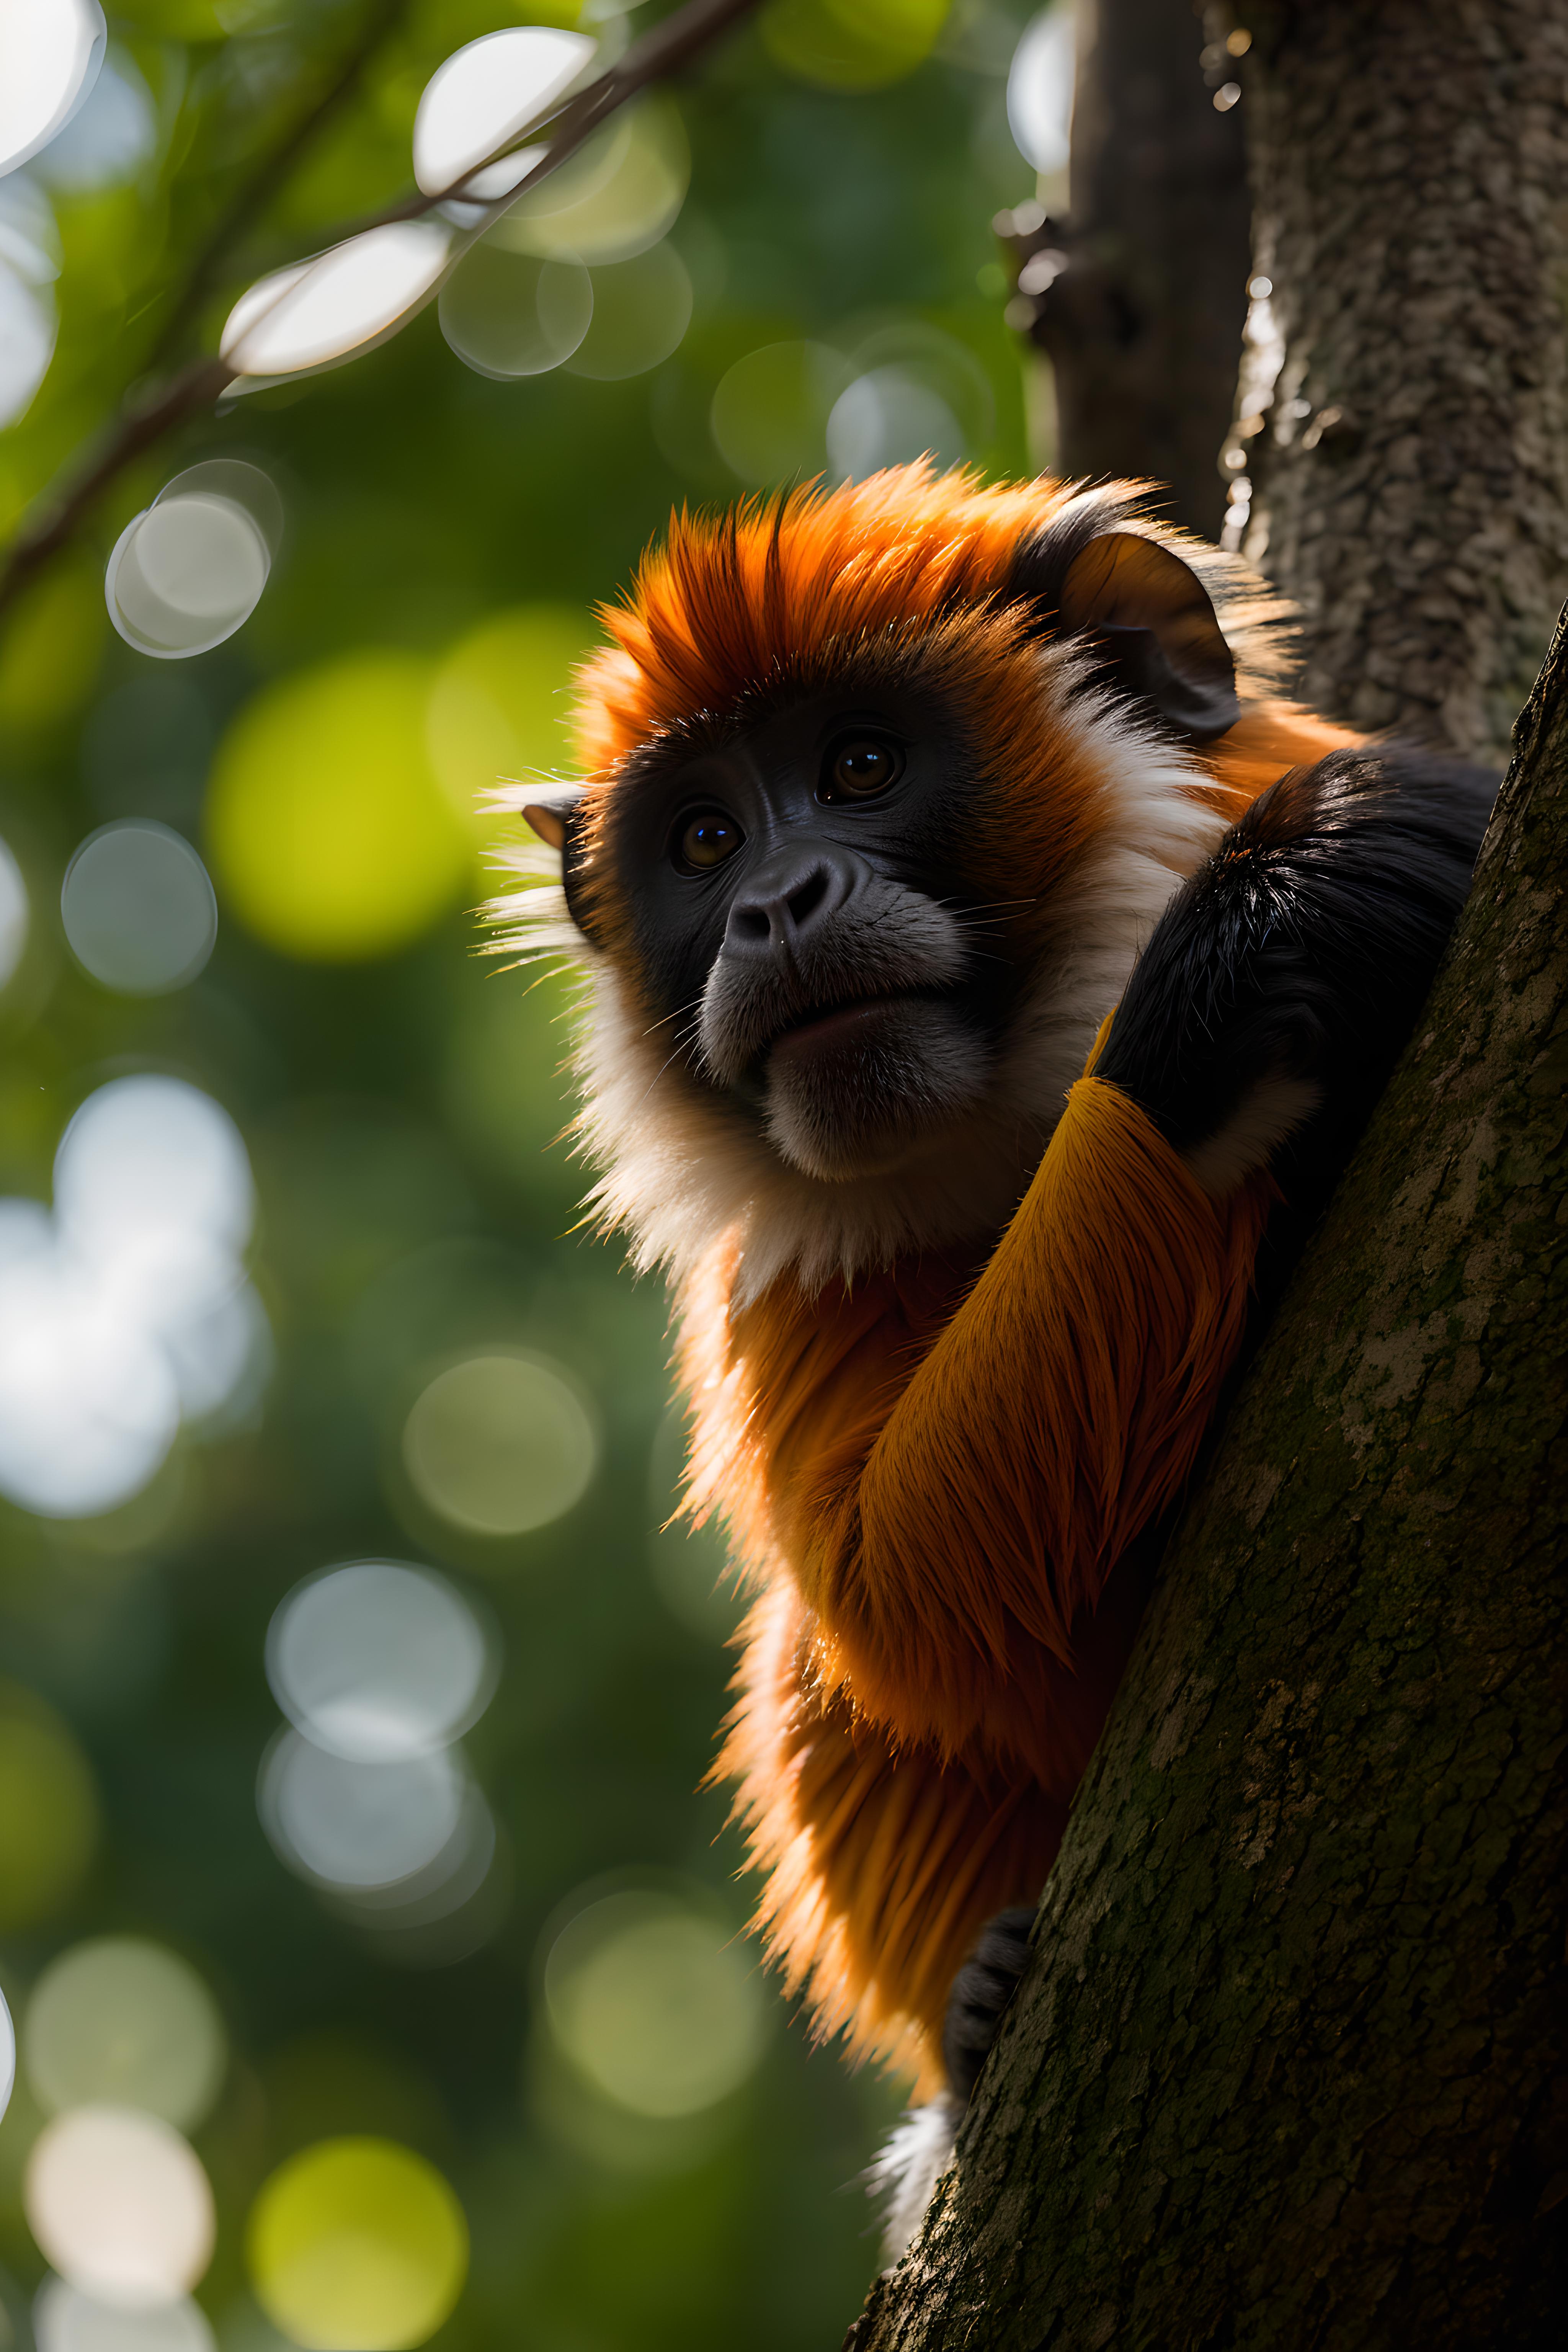 Orange and black monkey looking up at the camera while perched on a tree branch.